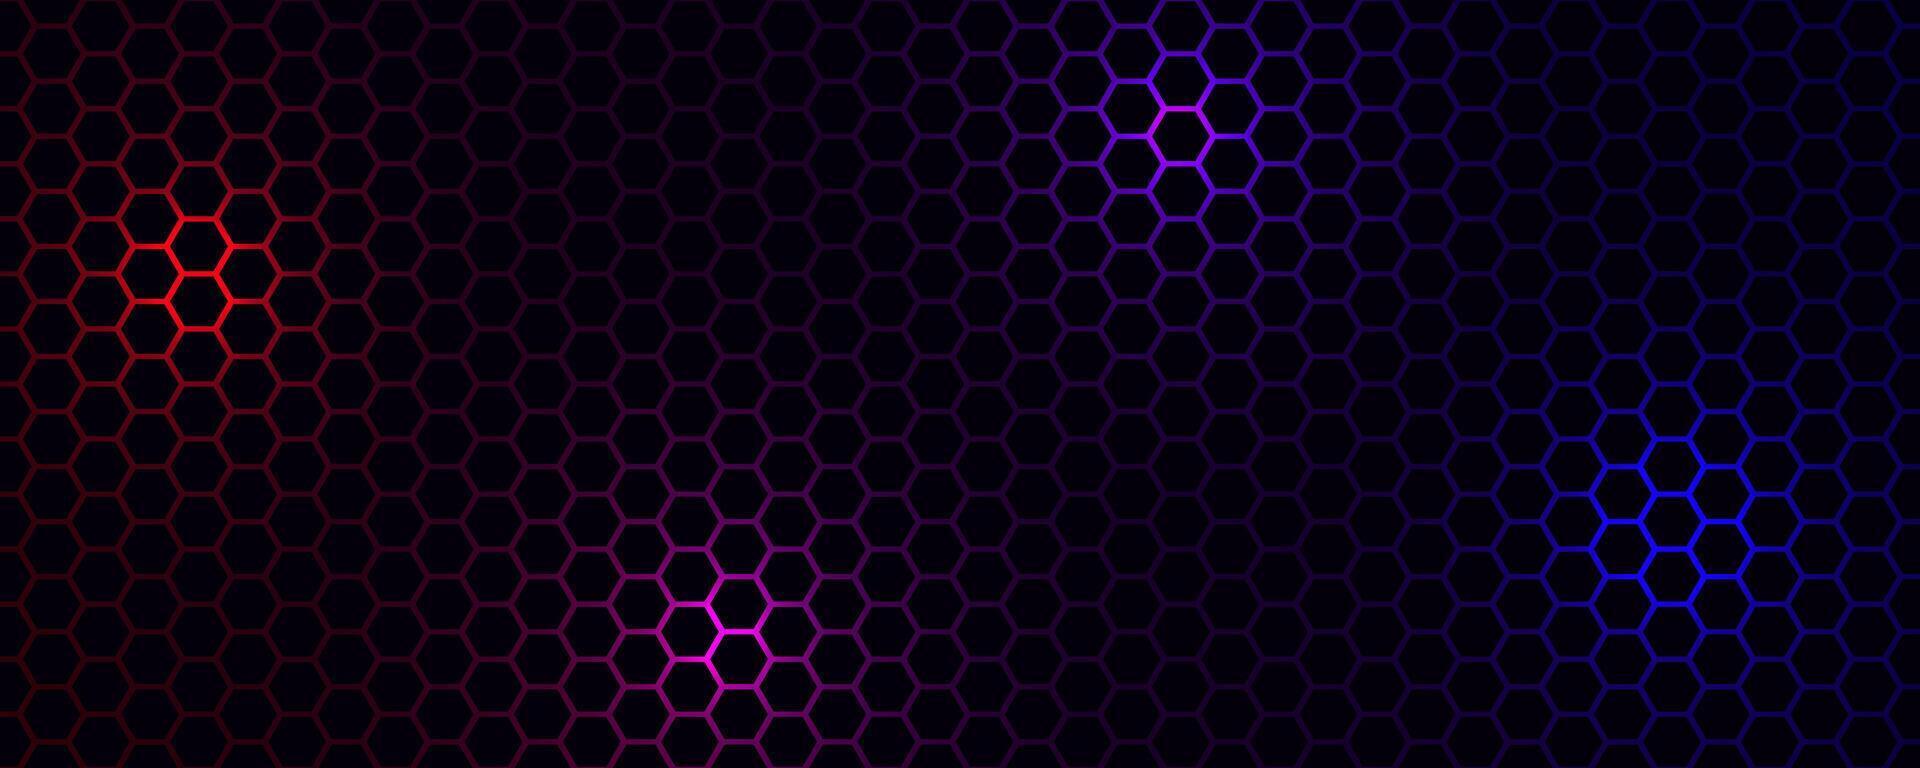 Black hexagon techno background overlap layer on dark space with red blue light effect decoration. Modern graphic design element future style concept for web banner, flyer, card, cover, or brochure vector